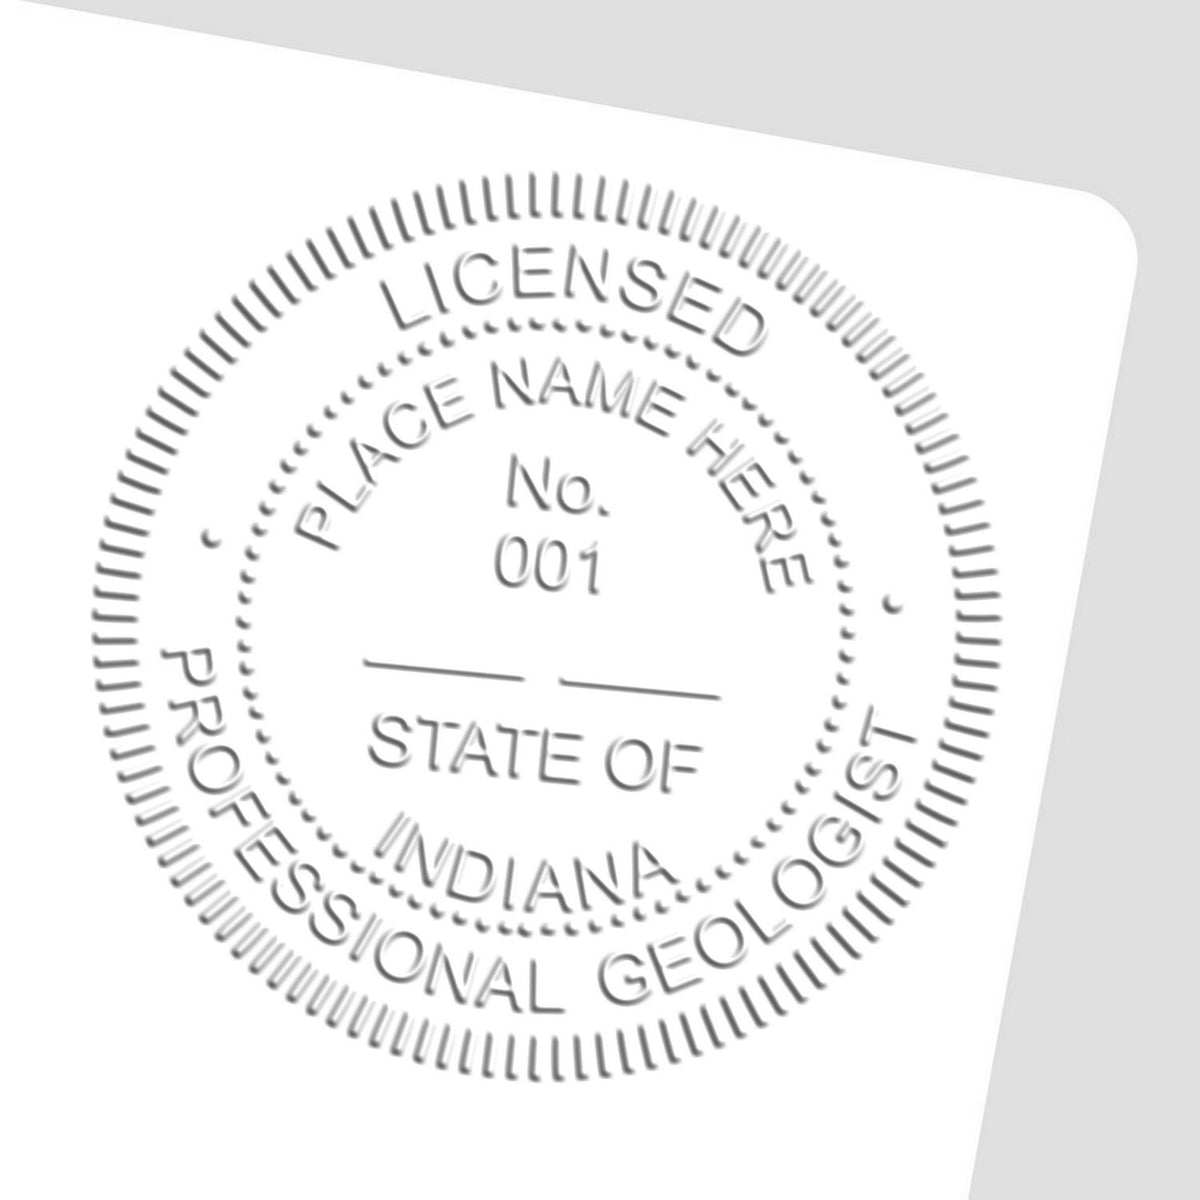 A photograph of the Soft Indiana Professional Geologist Seal stamp impression reveals a vivid, professional image of the on paper.